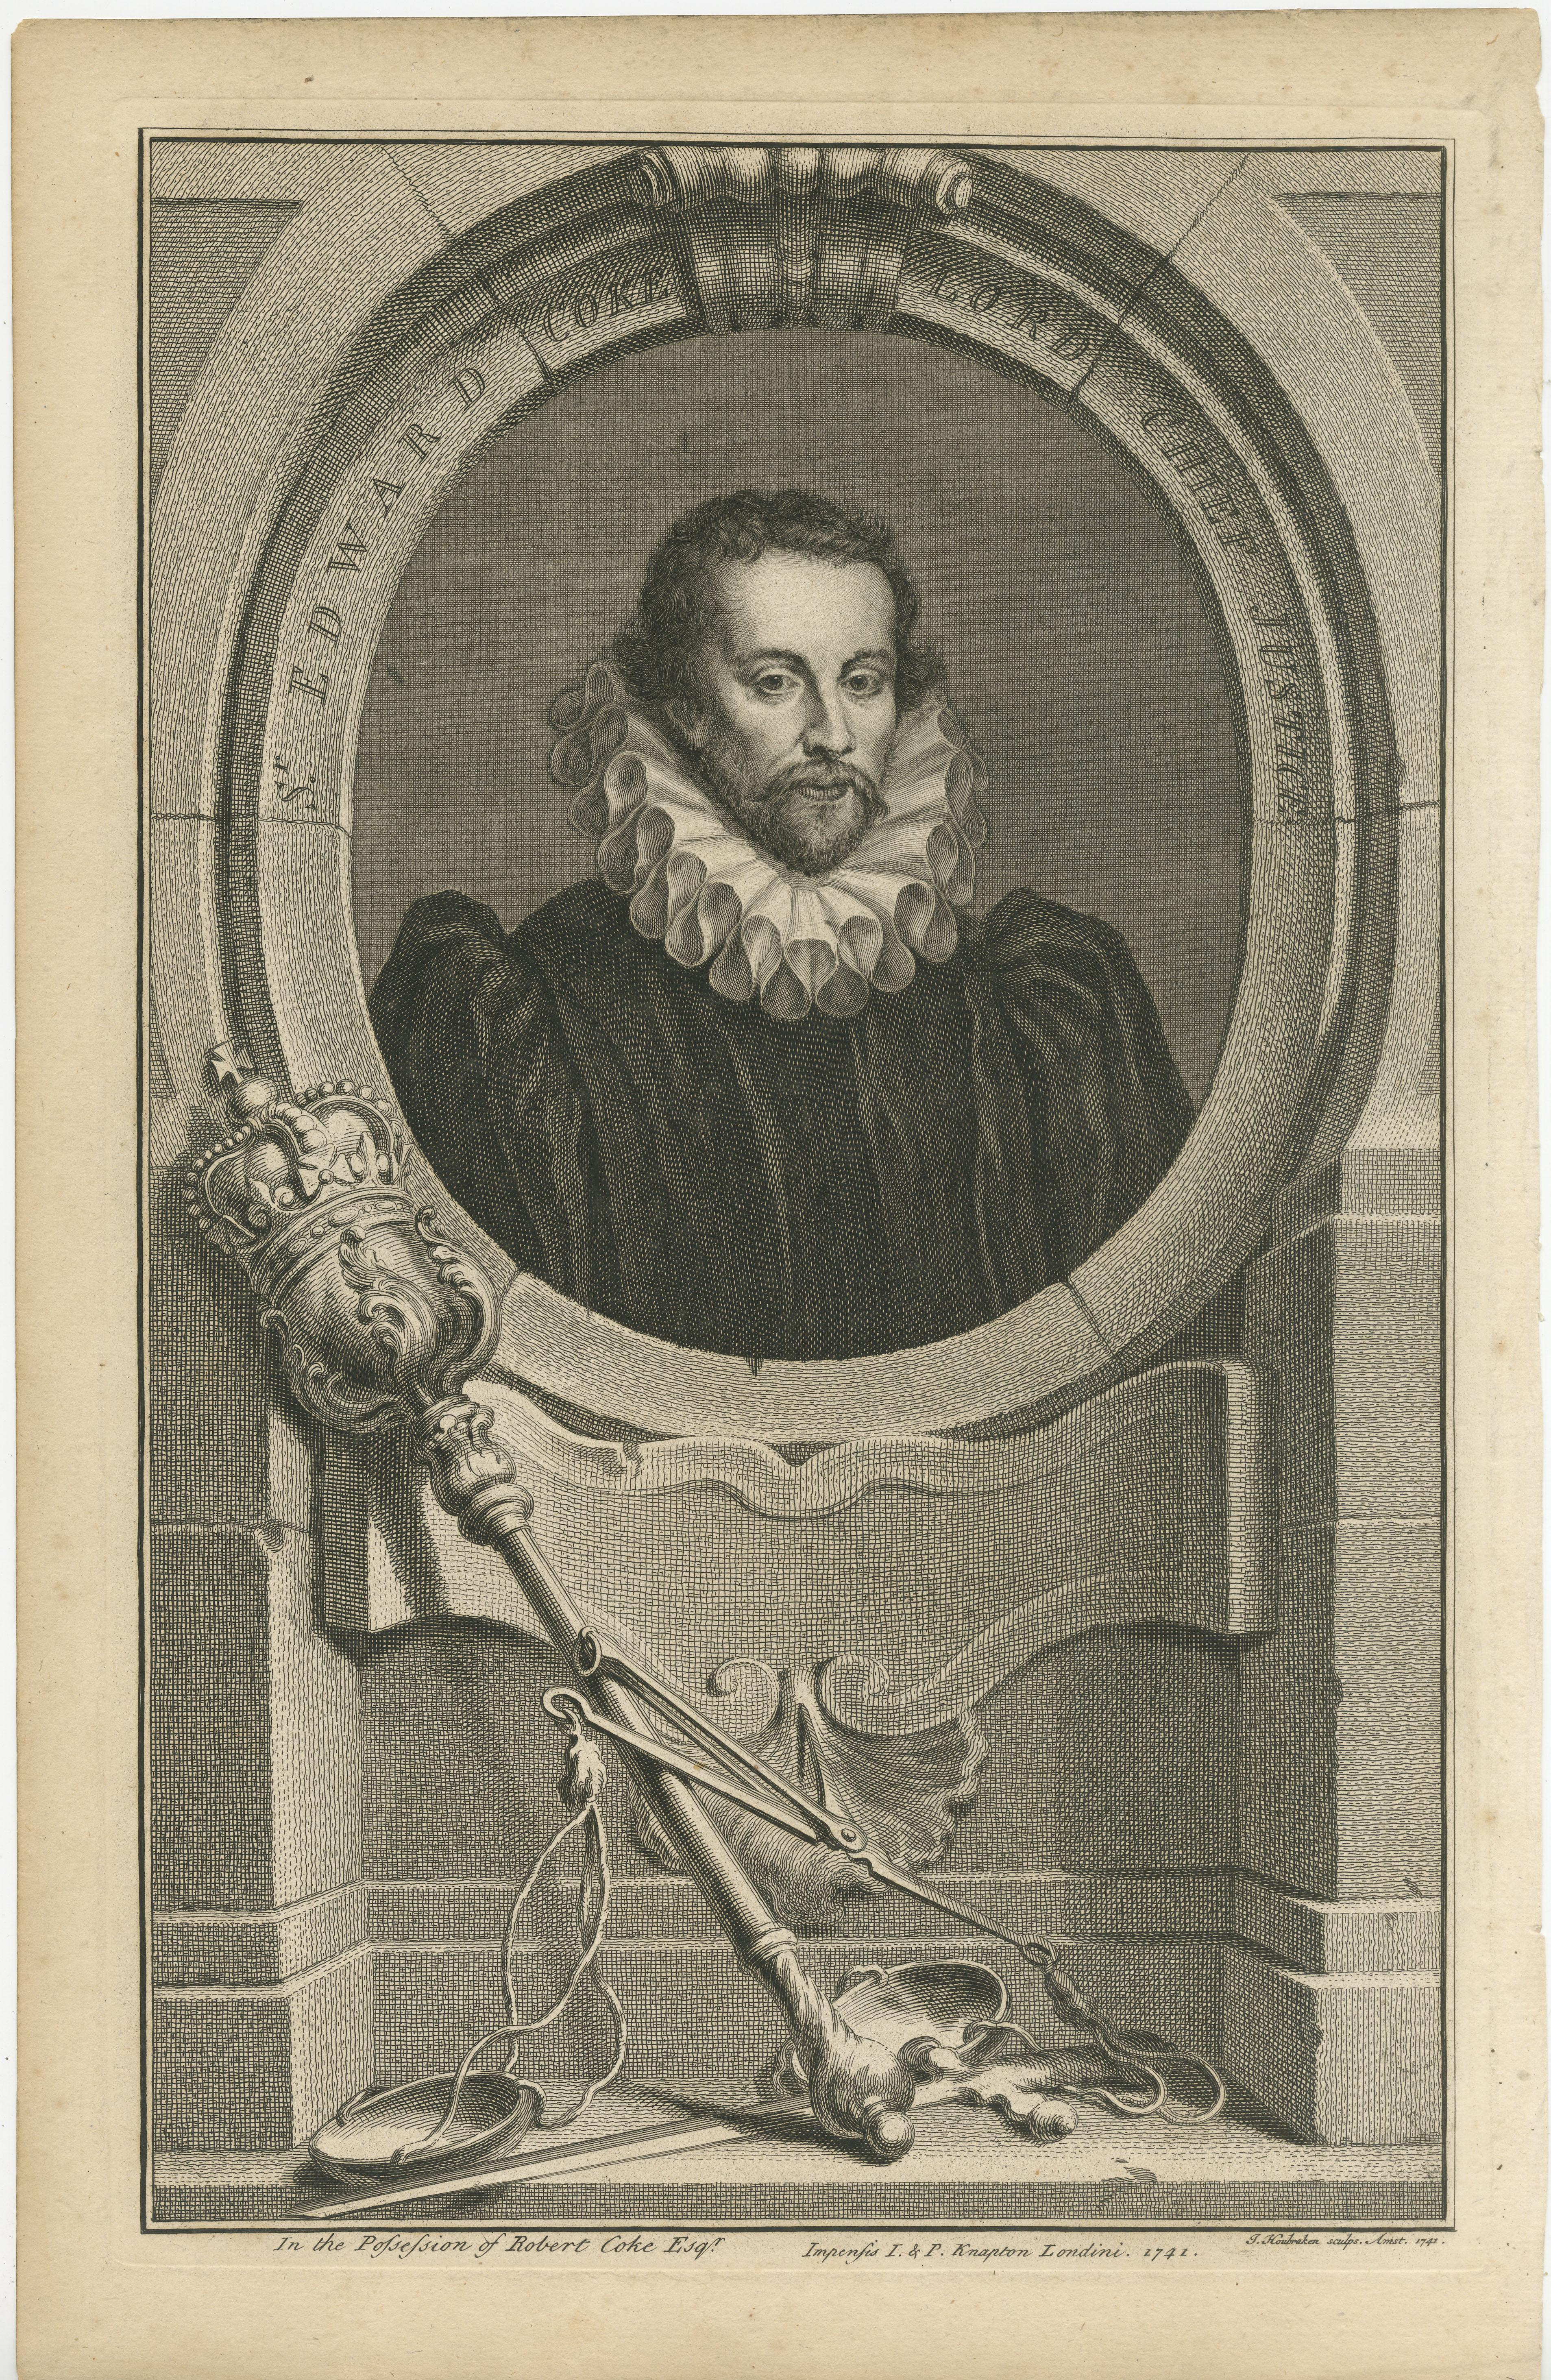 Antique portrait titled 'Sr. Edward Coke Lord Chief Justice'. Sir Edward Coke SL (1 February 1552 – 3 September 1634) was an English barrister, judge, and politician who is considered the greatest jurist of the Elizabethan and Jacobean eras.

This